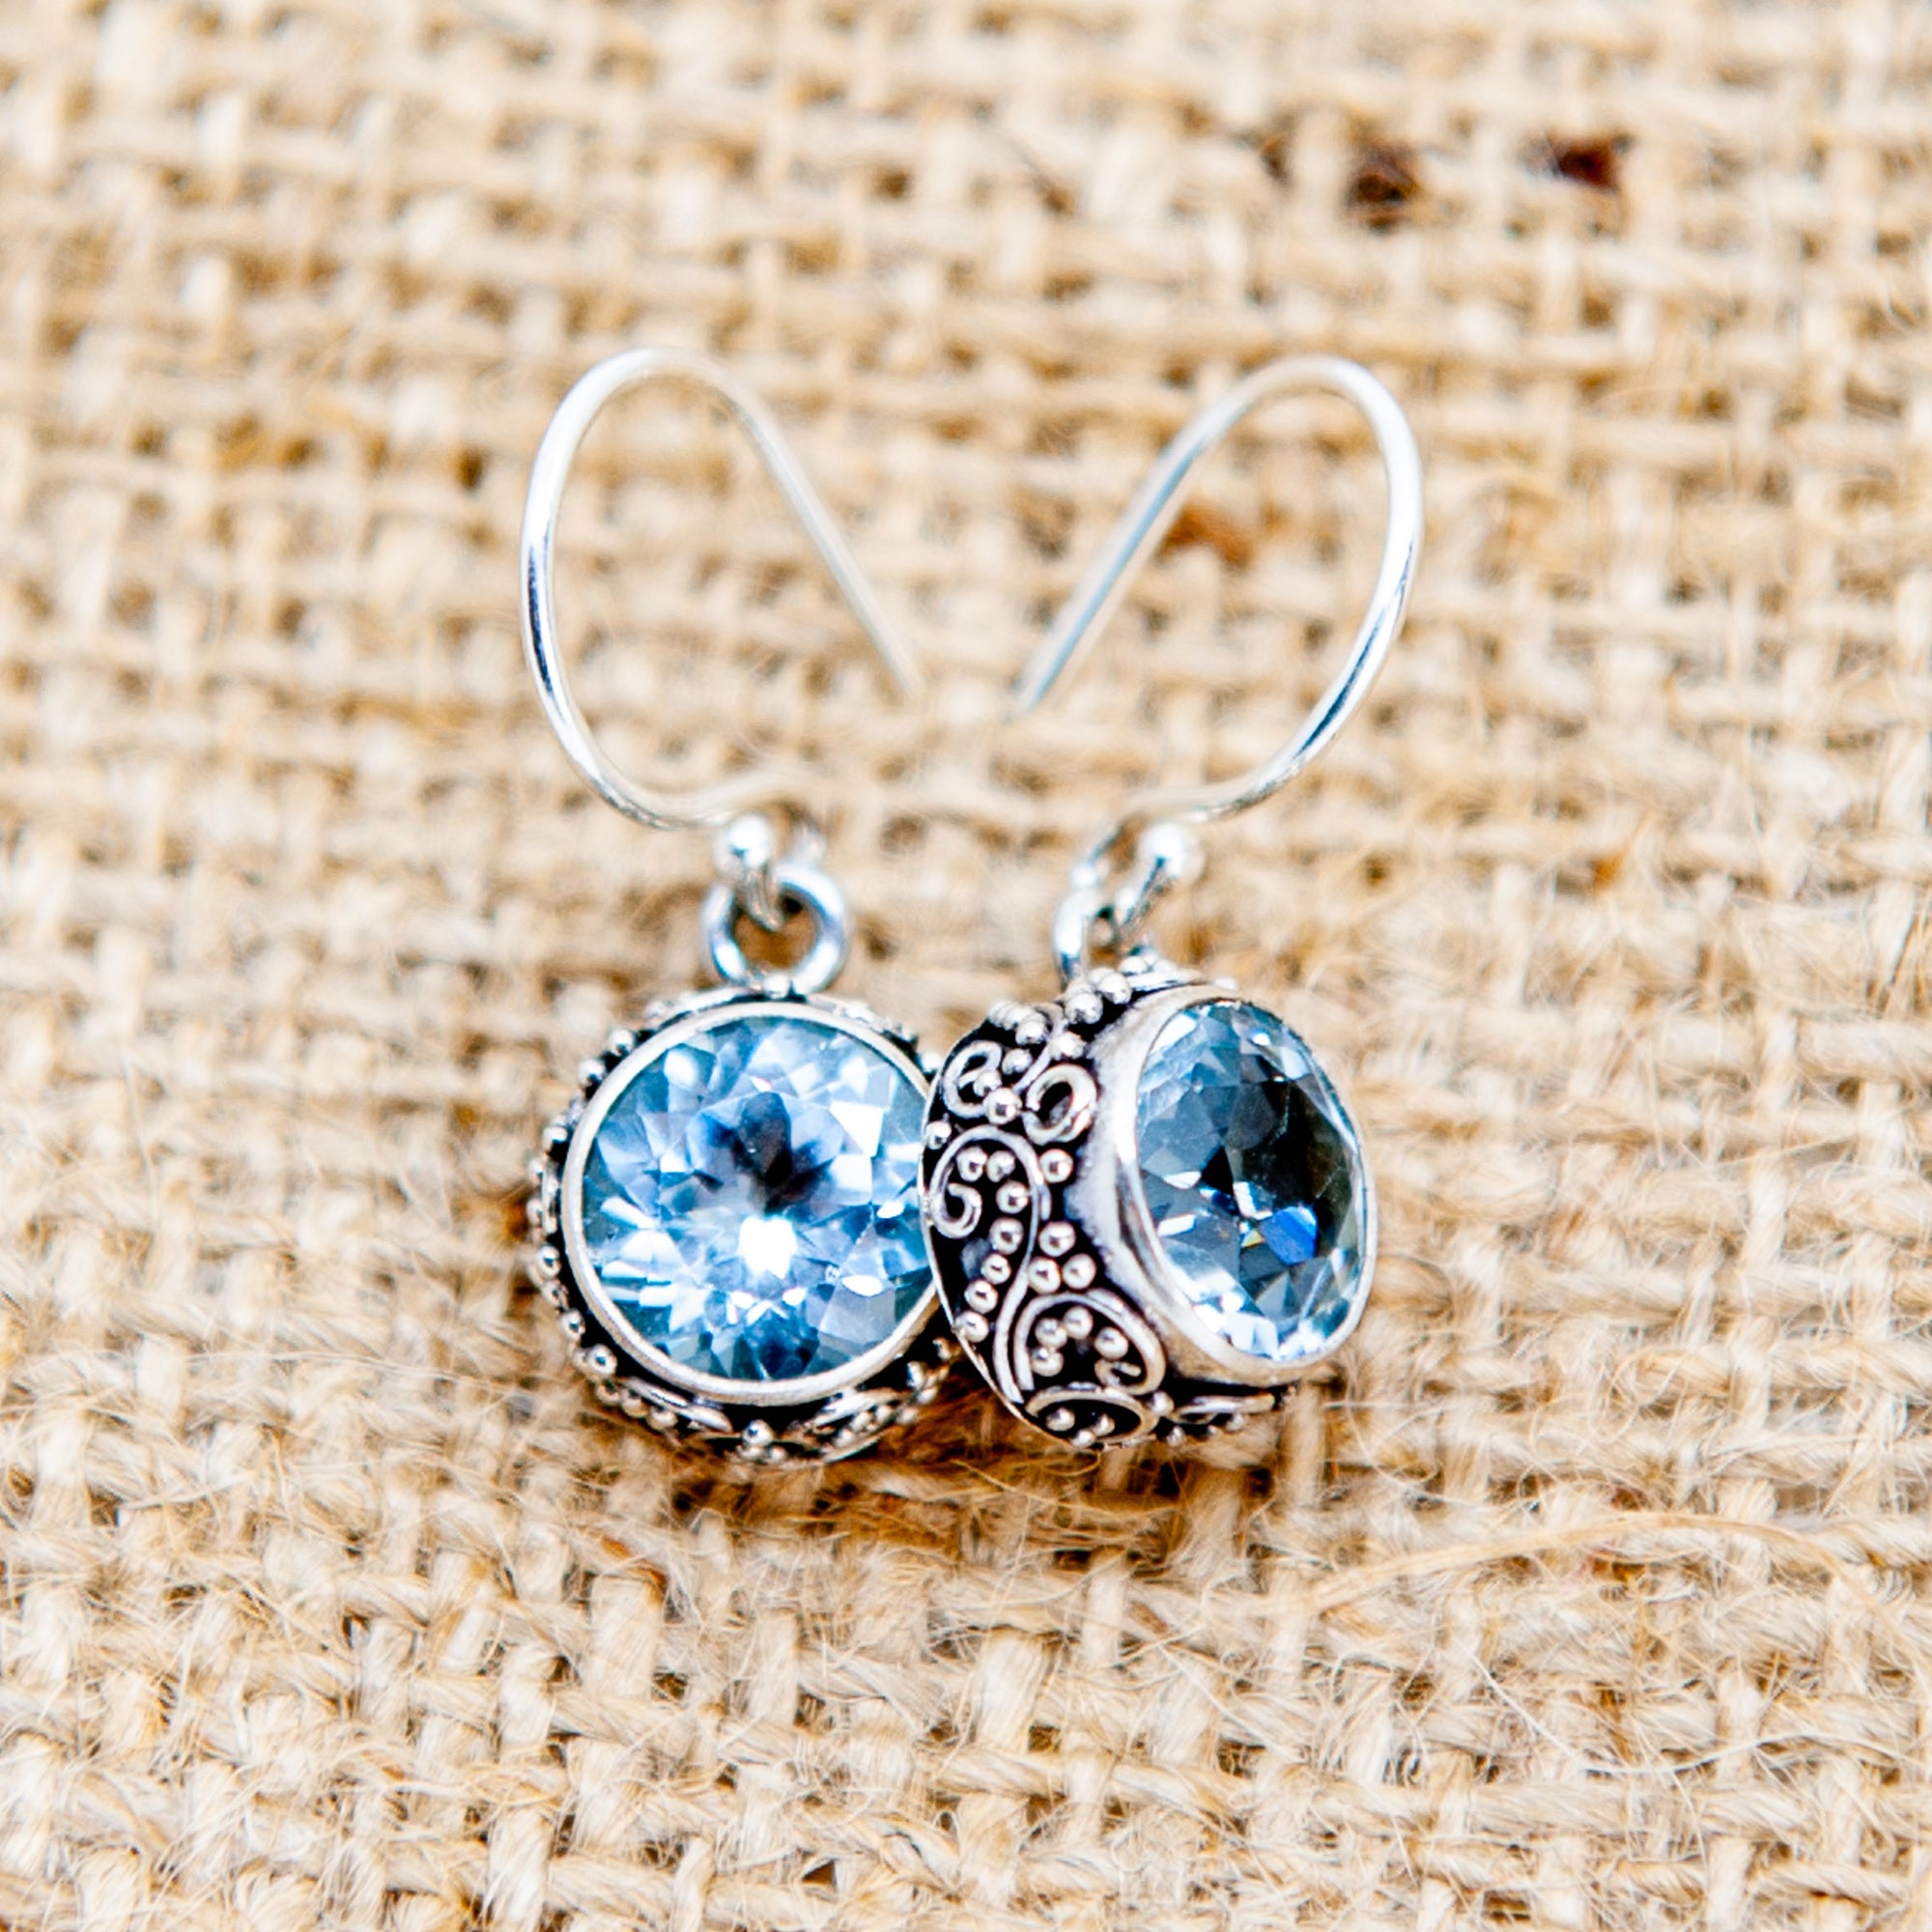 Blue Topaz Round with Paisley Edging